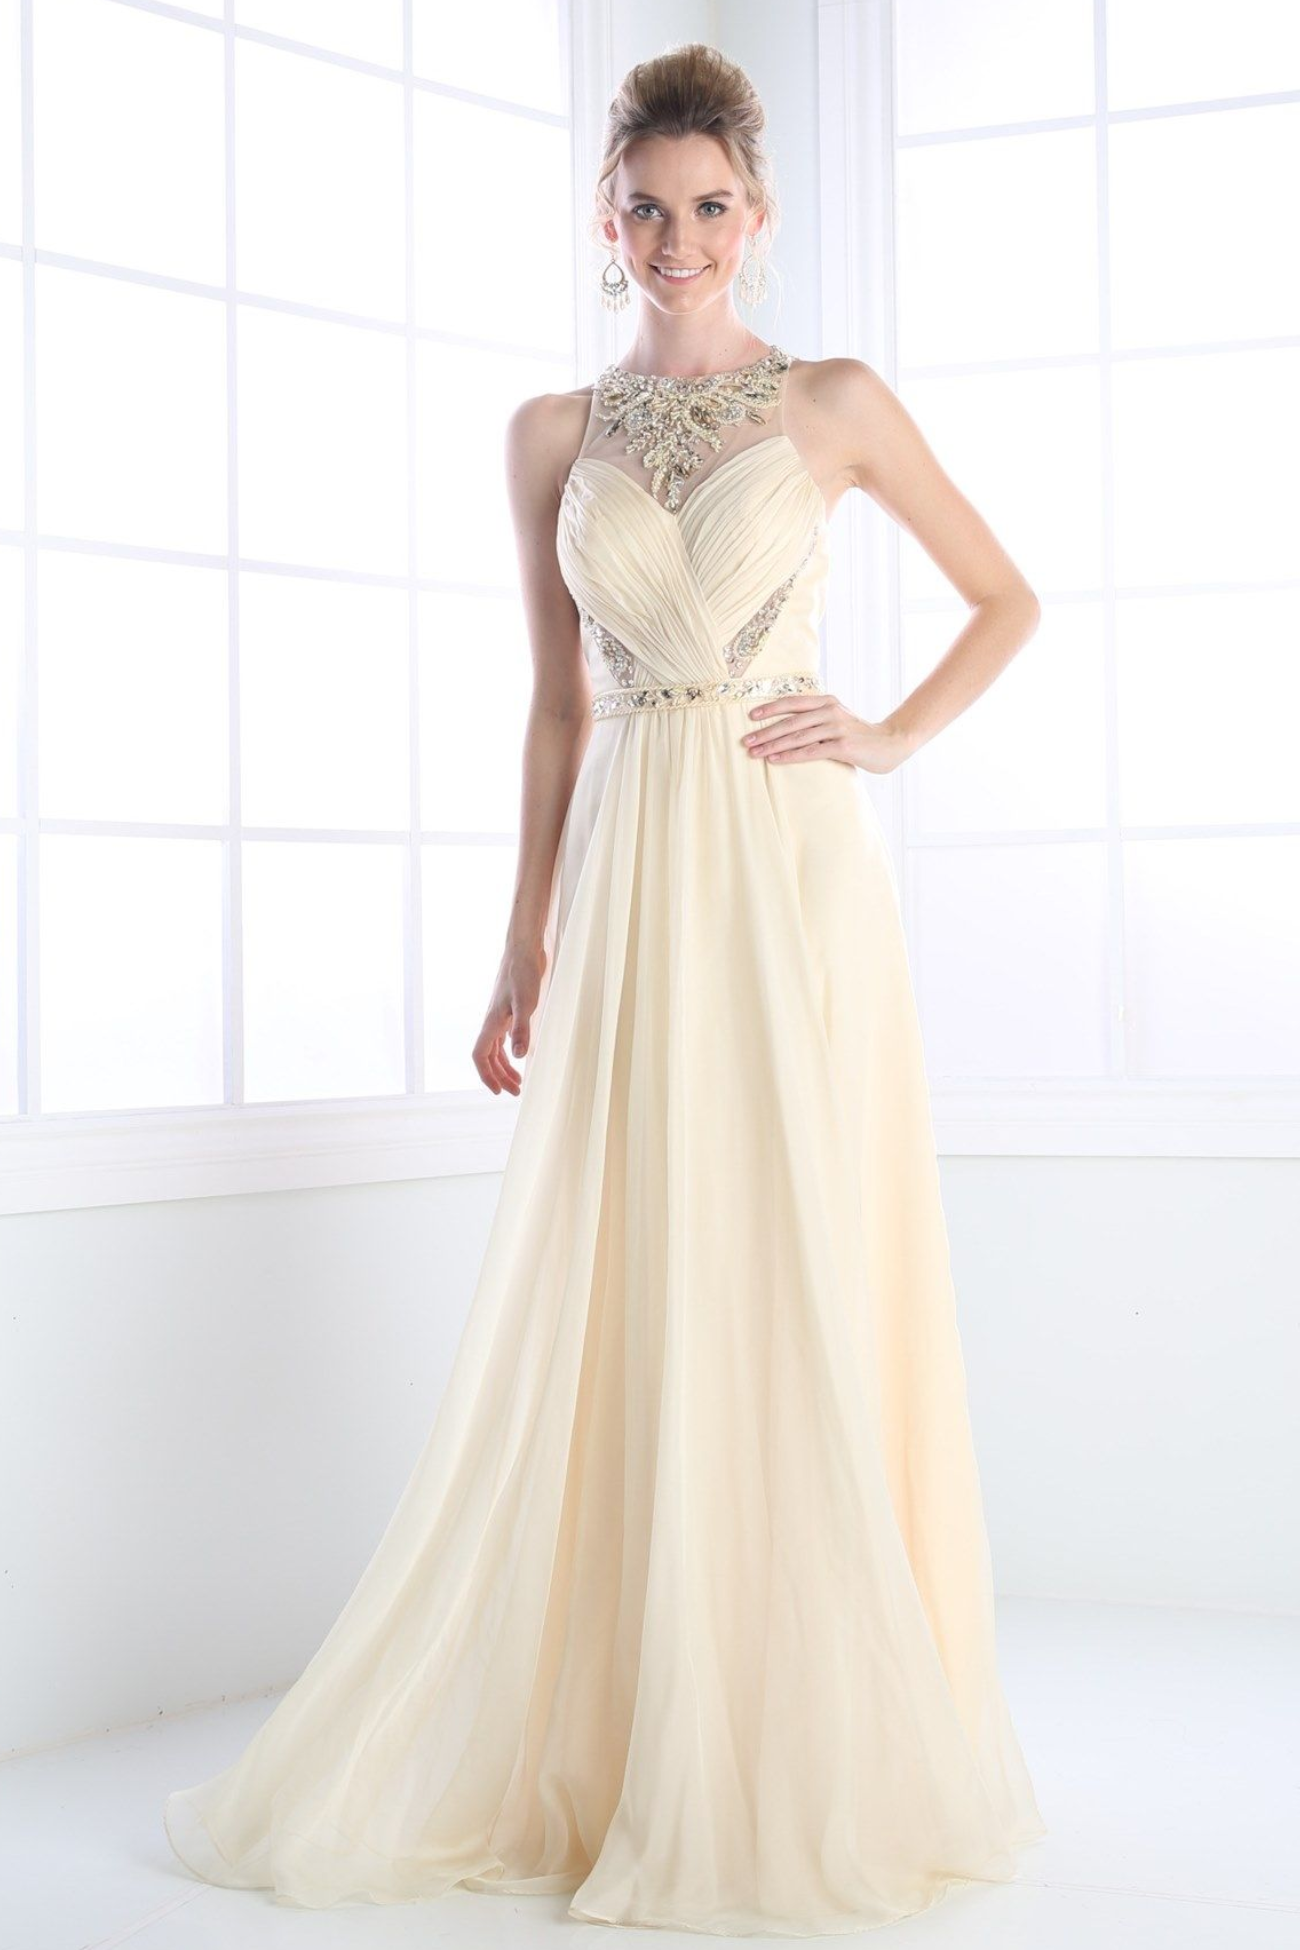 A-Line Gown with Delicate Jewel Neckline